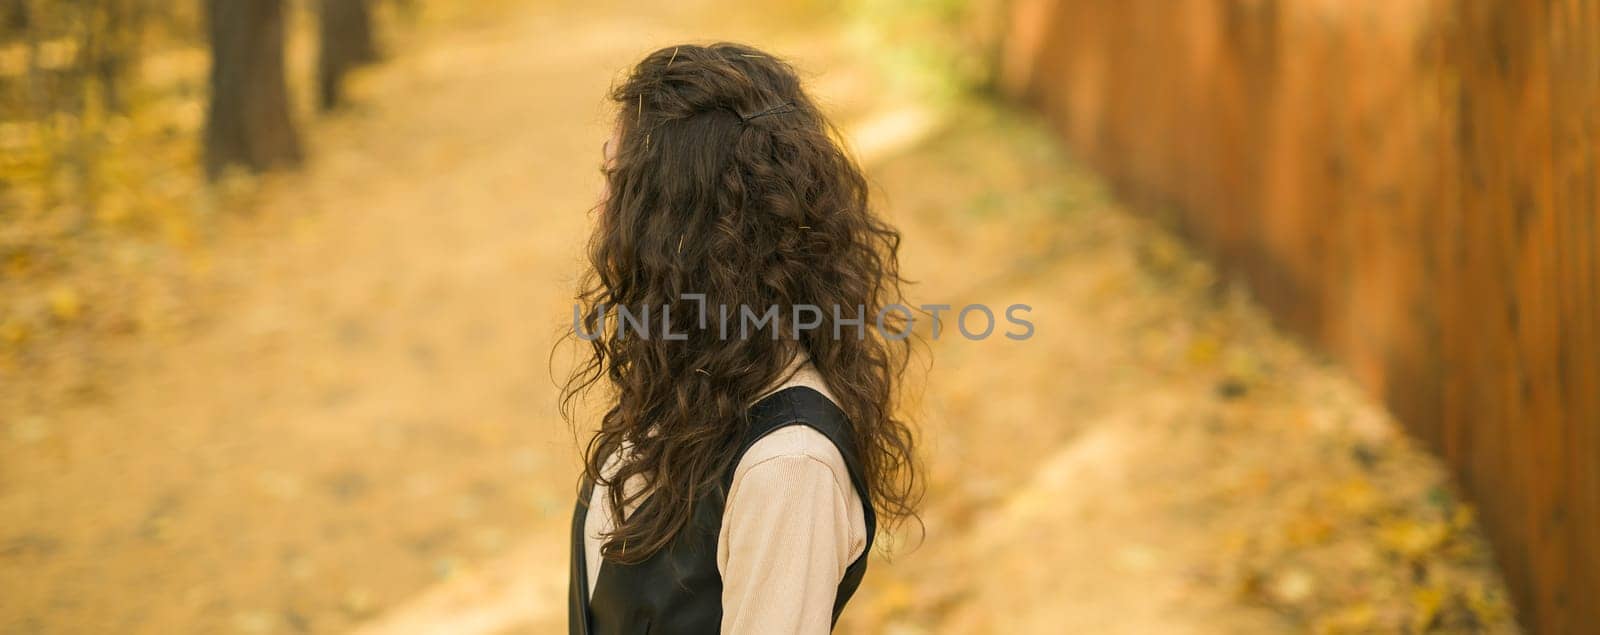 Girl in fall forest. Woman with long curly hair. Beautiful sunlight in the forest. Hair care. Millennial Generation and youth